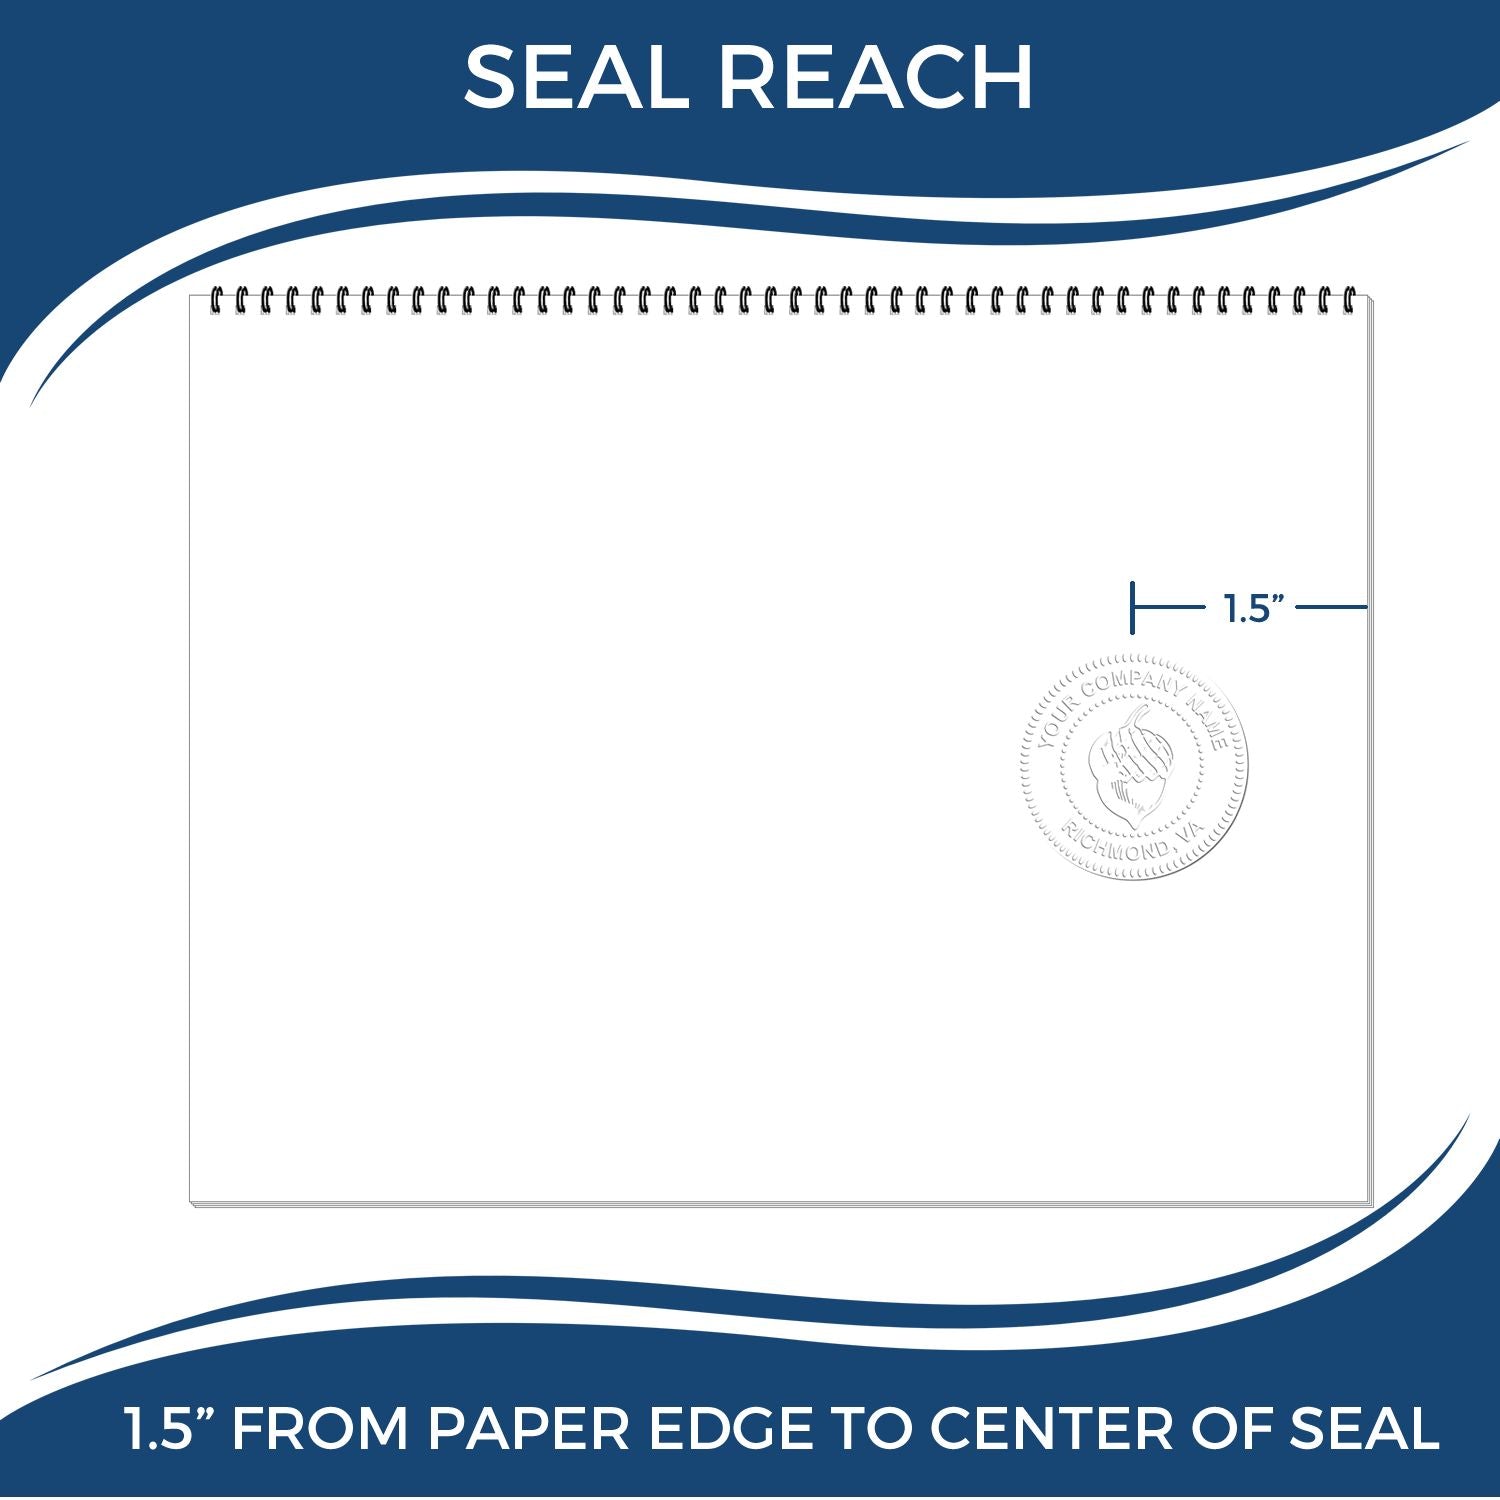 An infographic showing the seal reach which is represented by a ruler and a miniature seal image of the Soft Puerto Rico Professional Engineer Seal